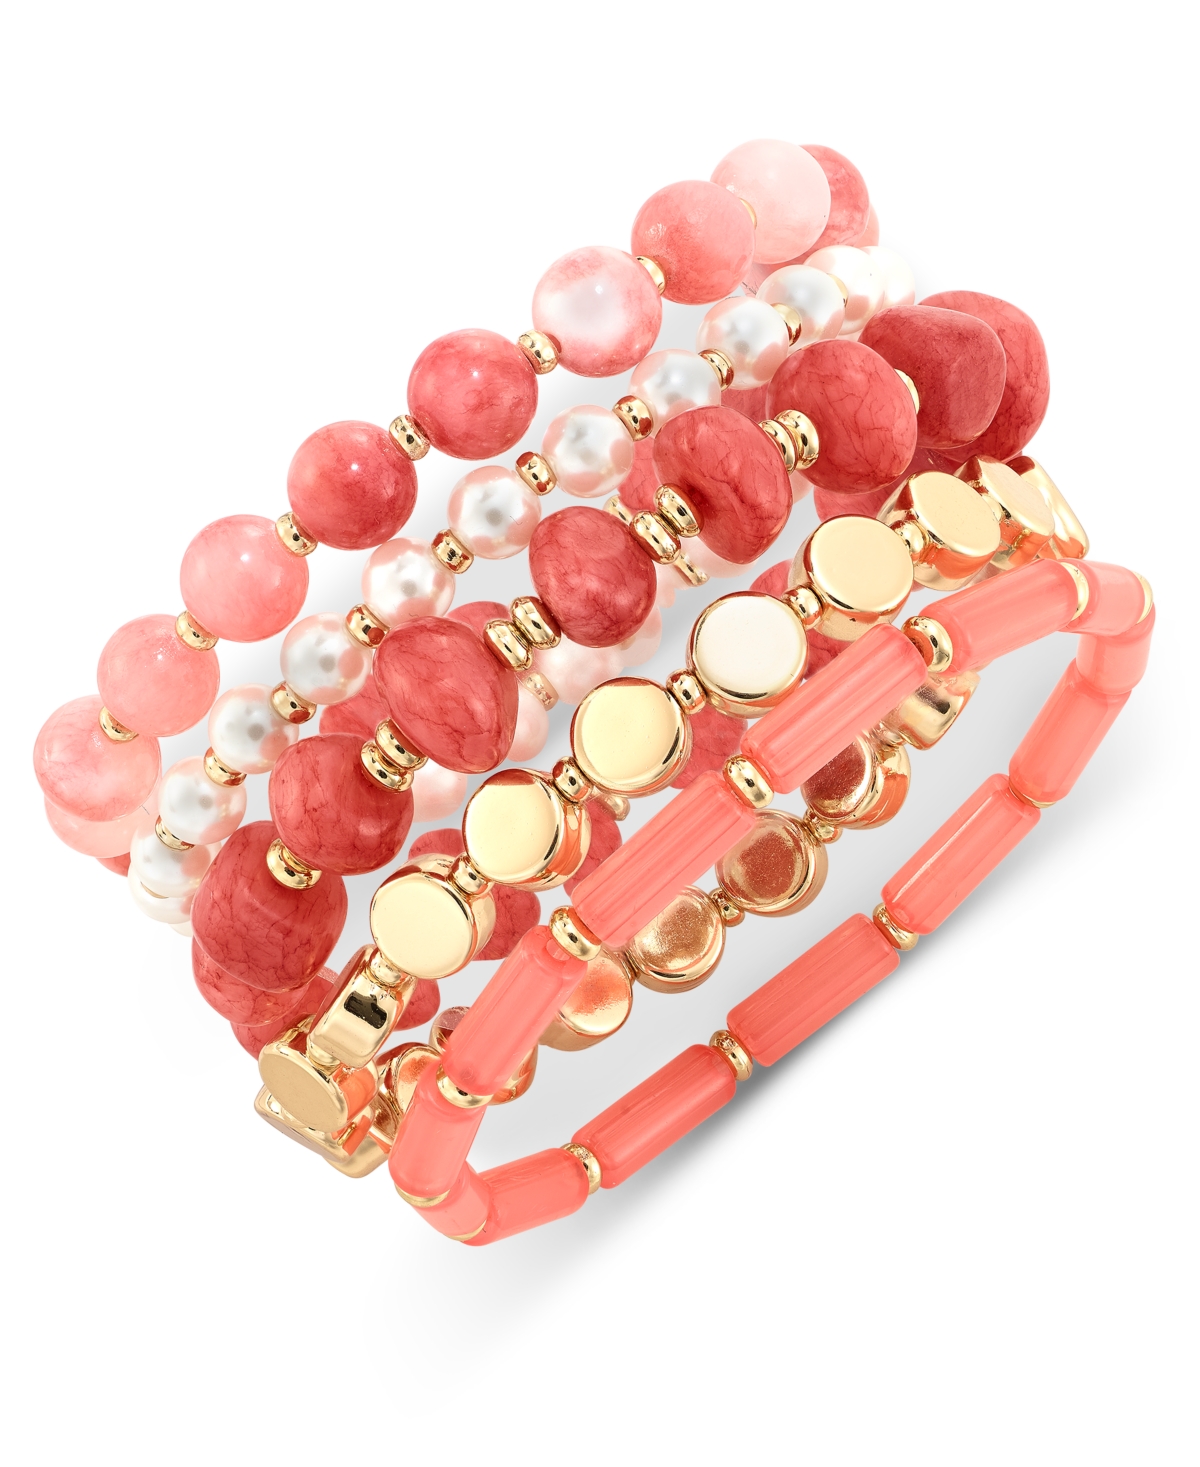 Gold-Tone 5-Pc. Set Beaded Stretch Bracelet, Created for Macy's - Coral